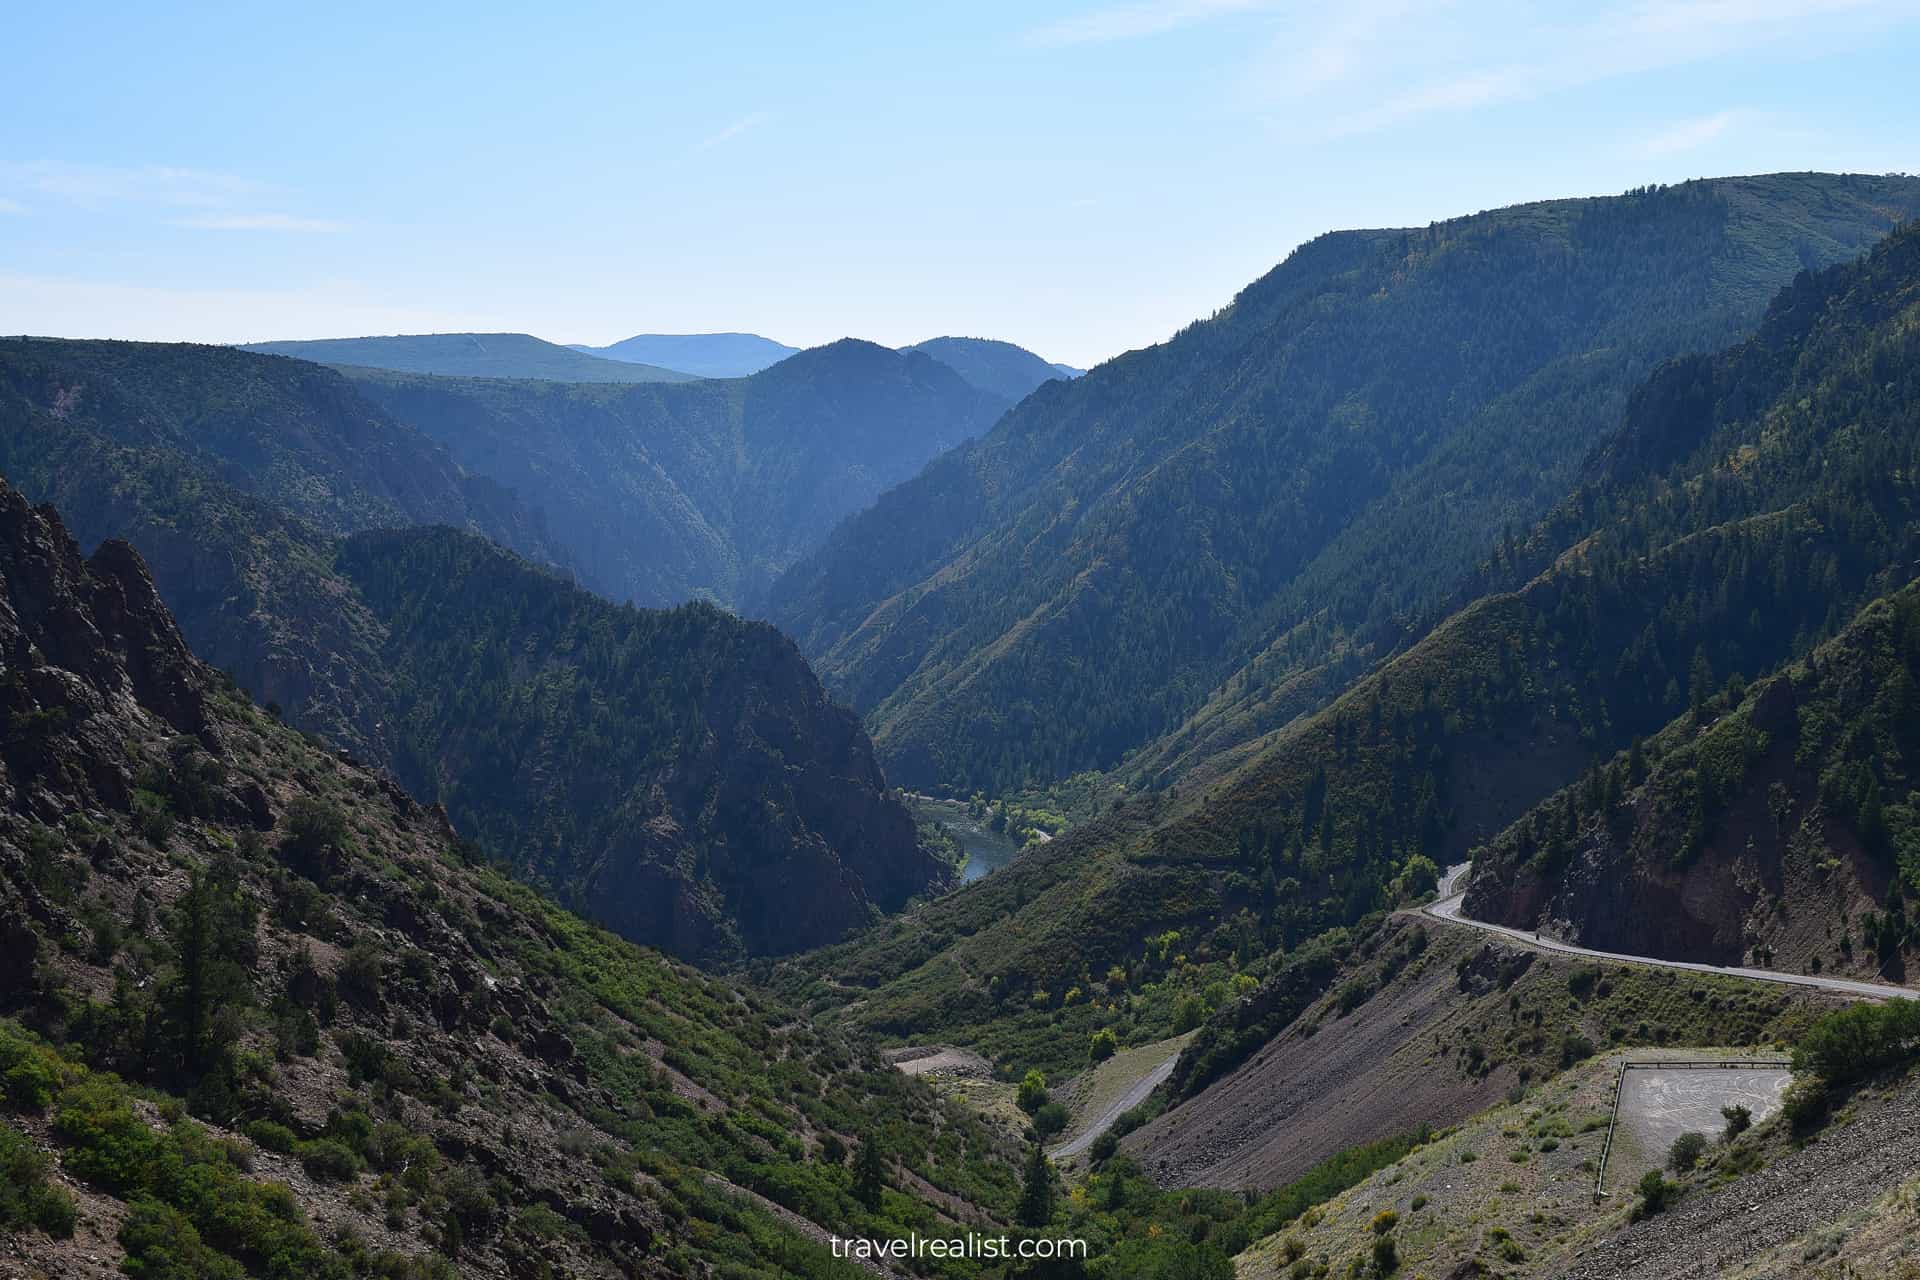 East Portal Road in Black Canyon of the Gunnison, Colorado, US